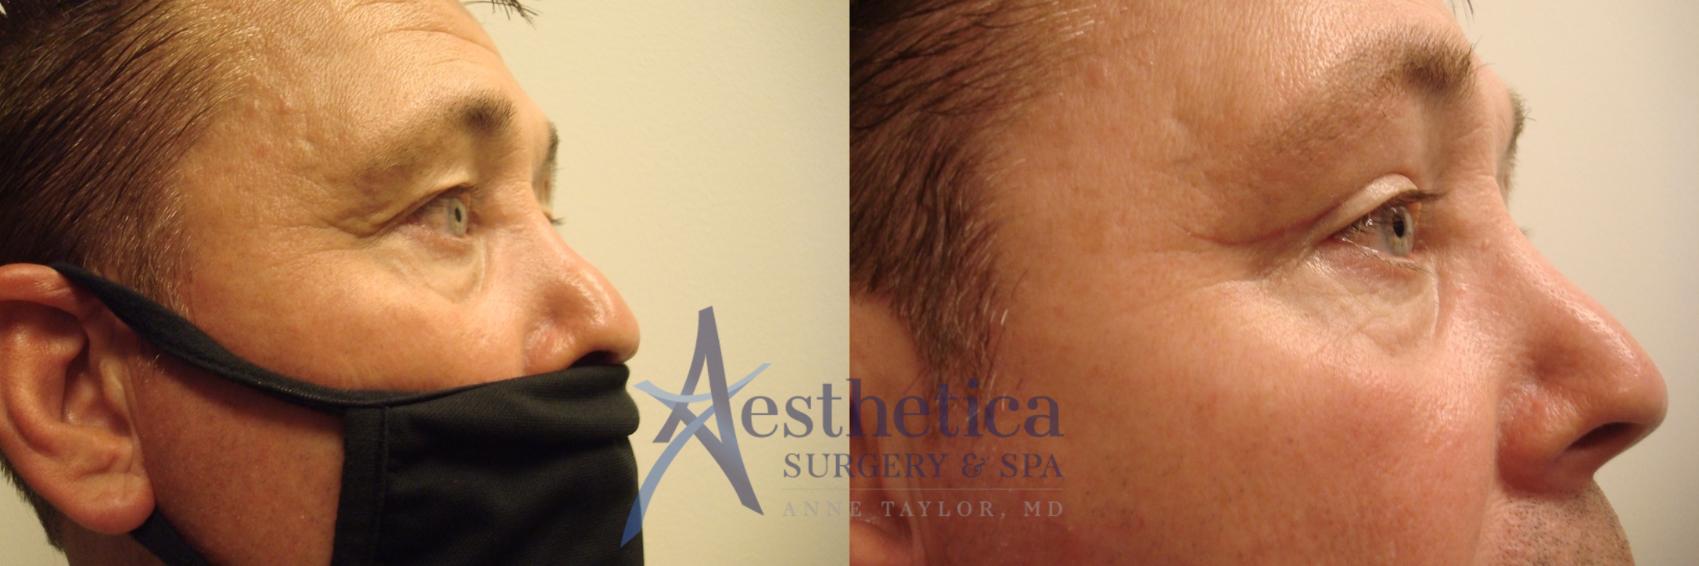 Blepharoplasty (Eyelid Surgery) Case 456 Before & After Right Side | Worthington, OH | Aesthetica Surgery & Spa